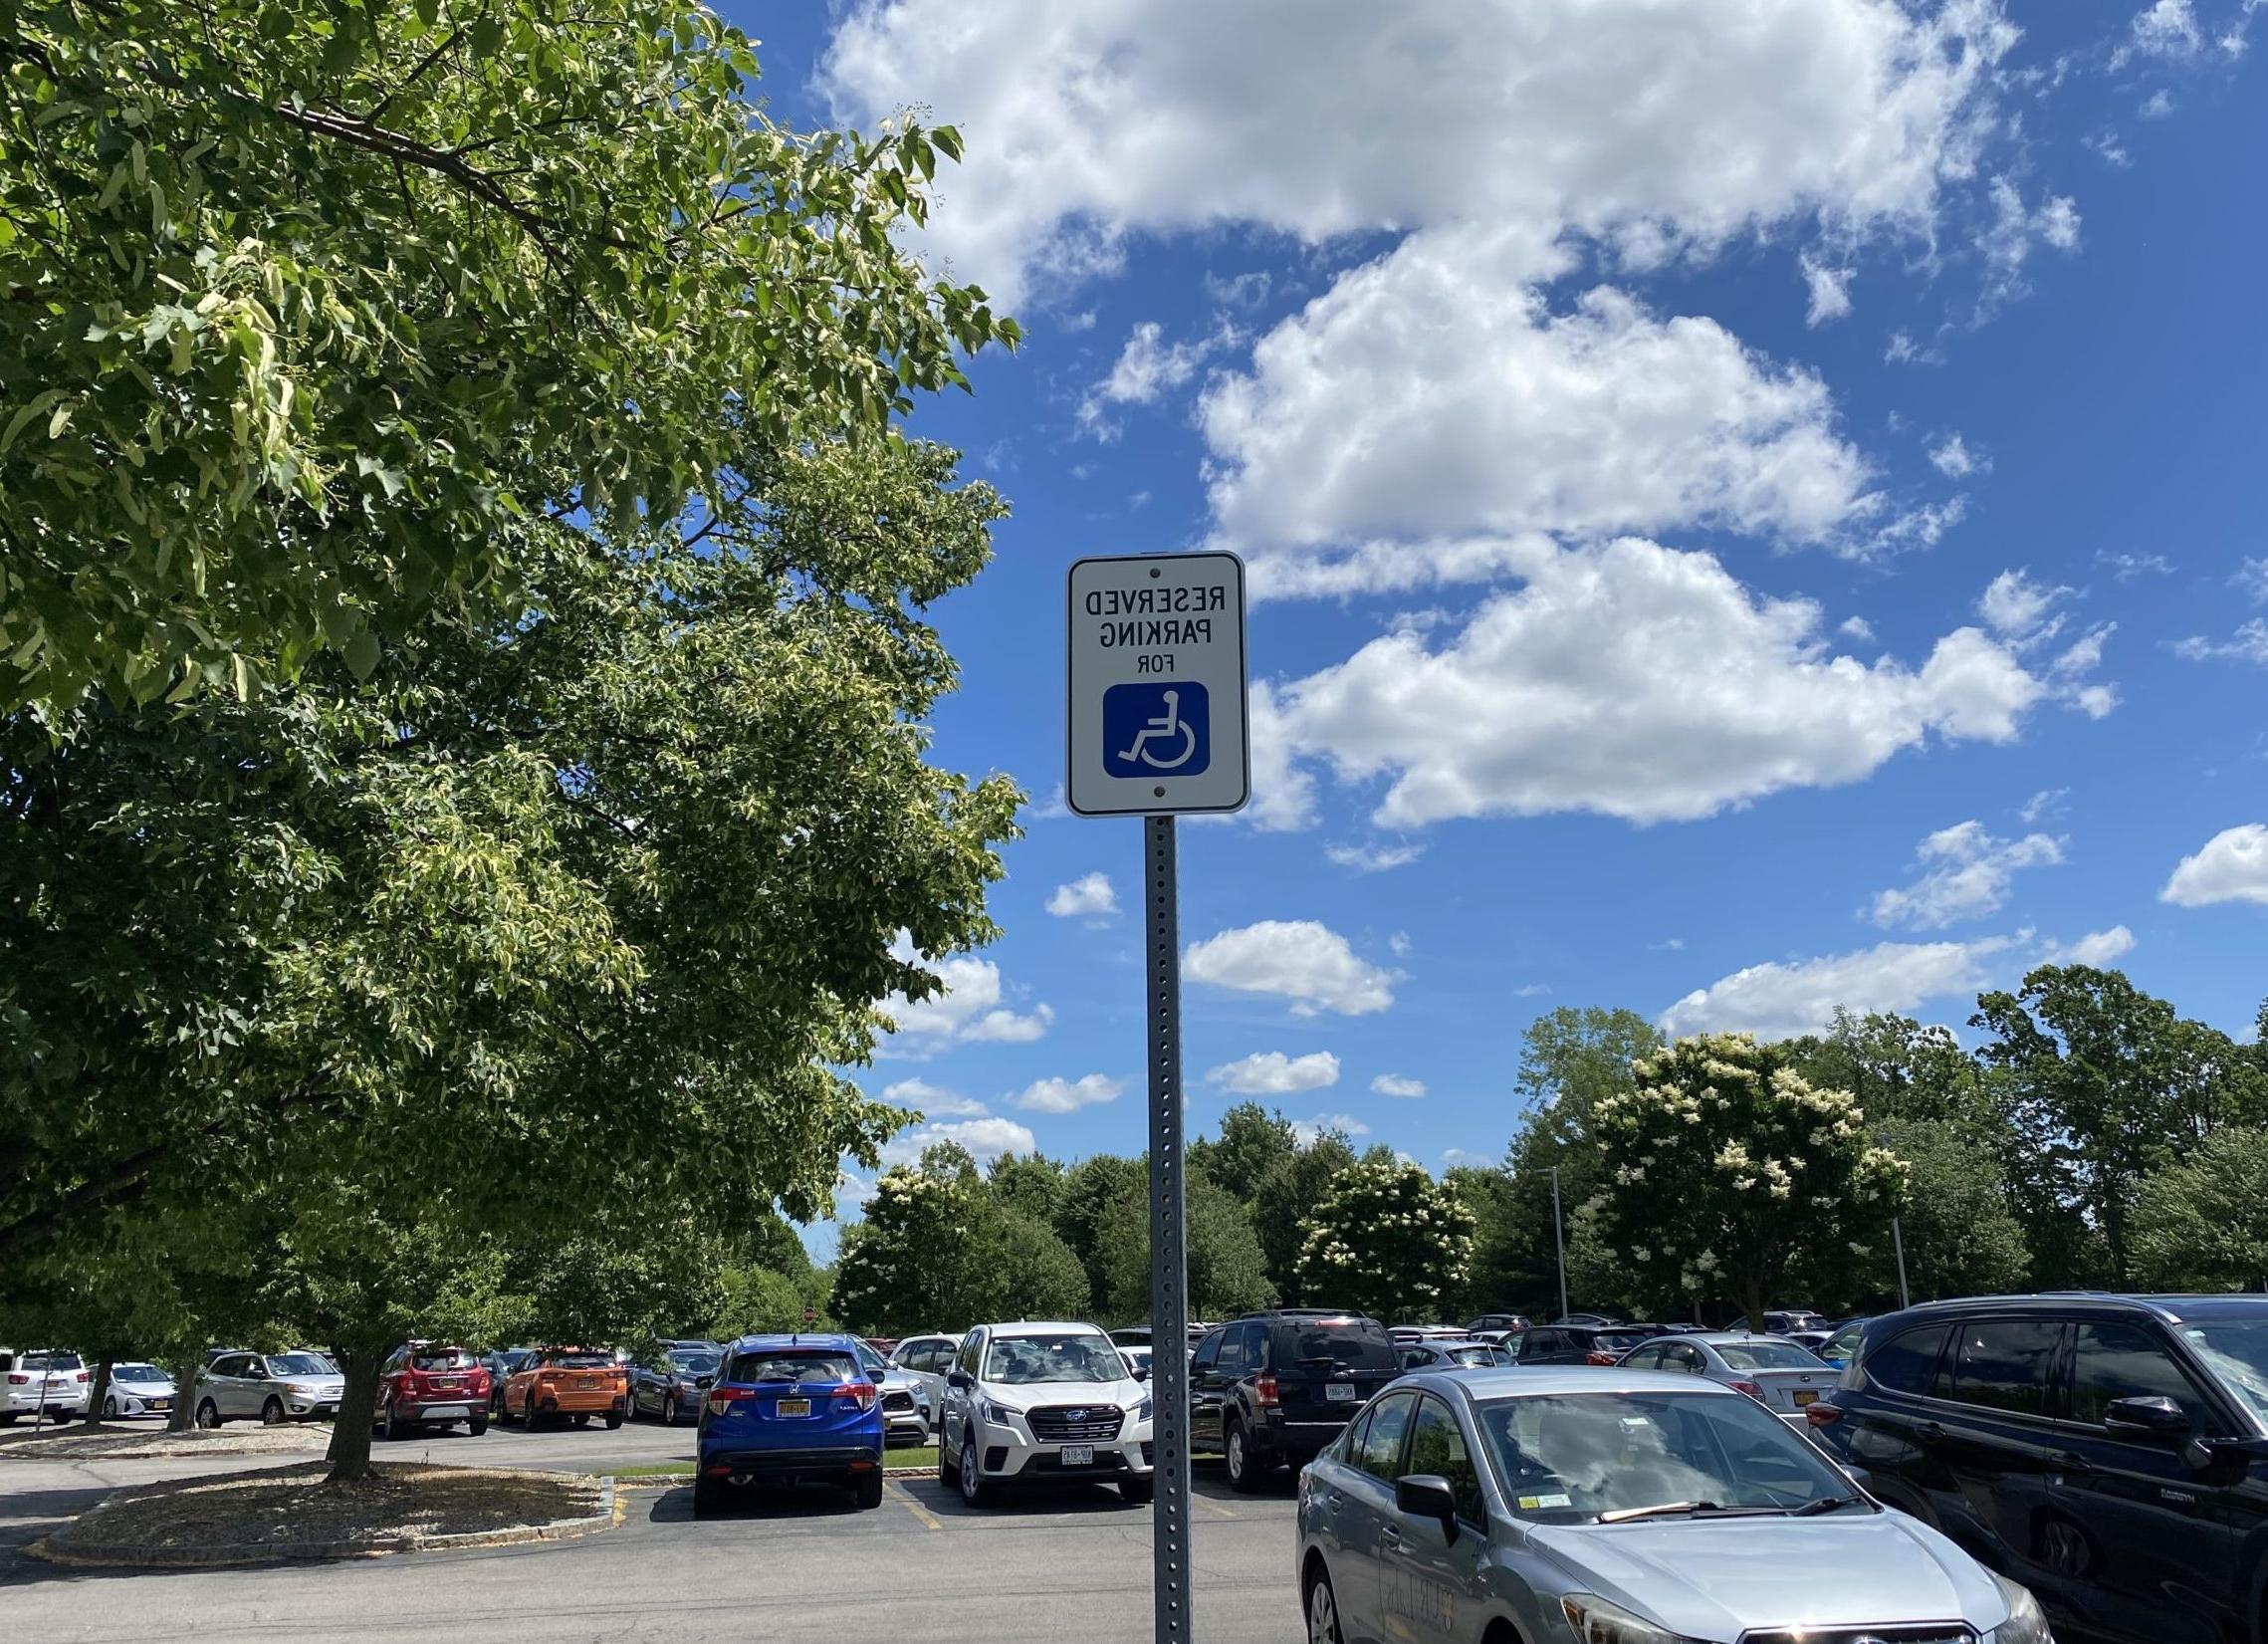 Accessible parking sign in URMC parking lot